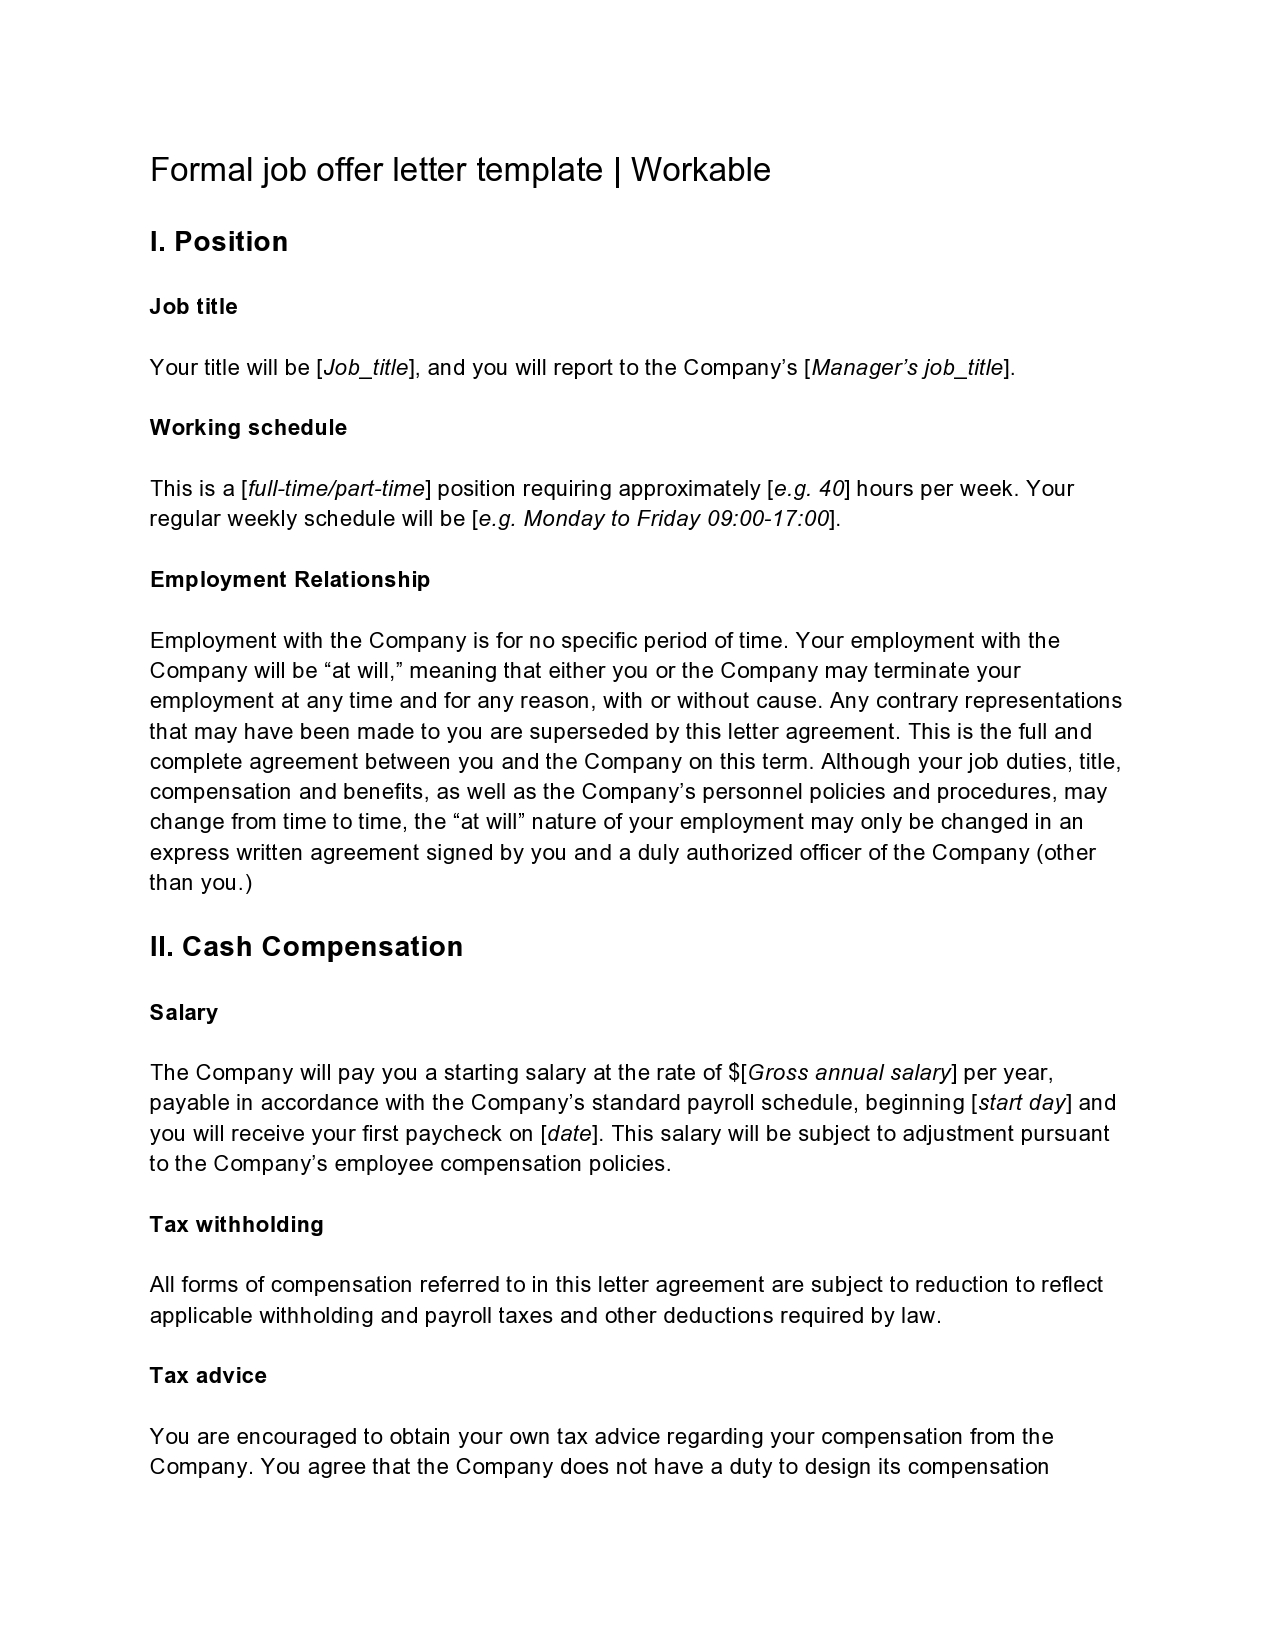 Free employment offer letter template 02